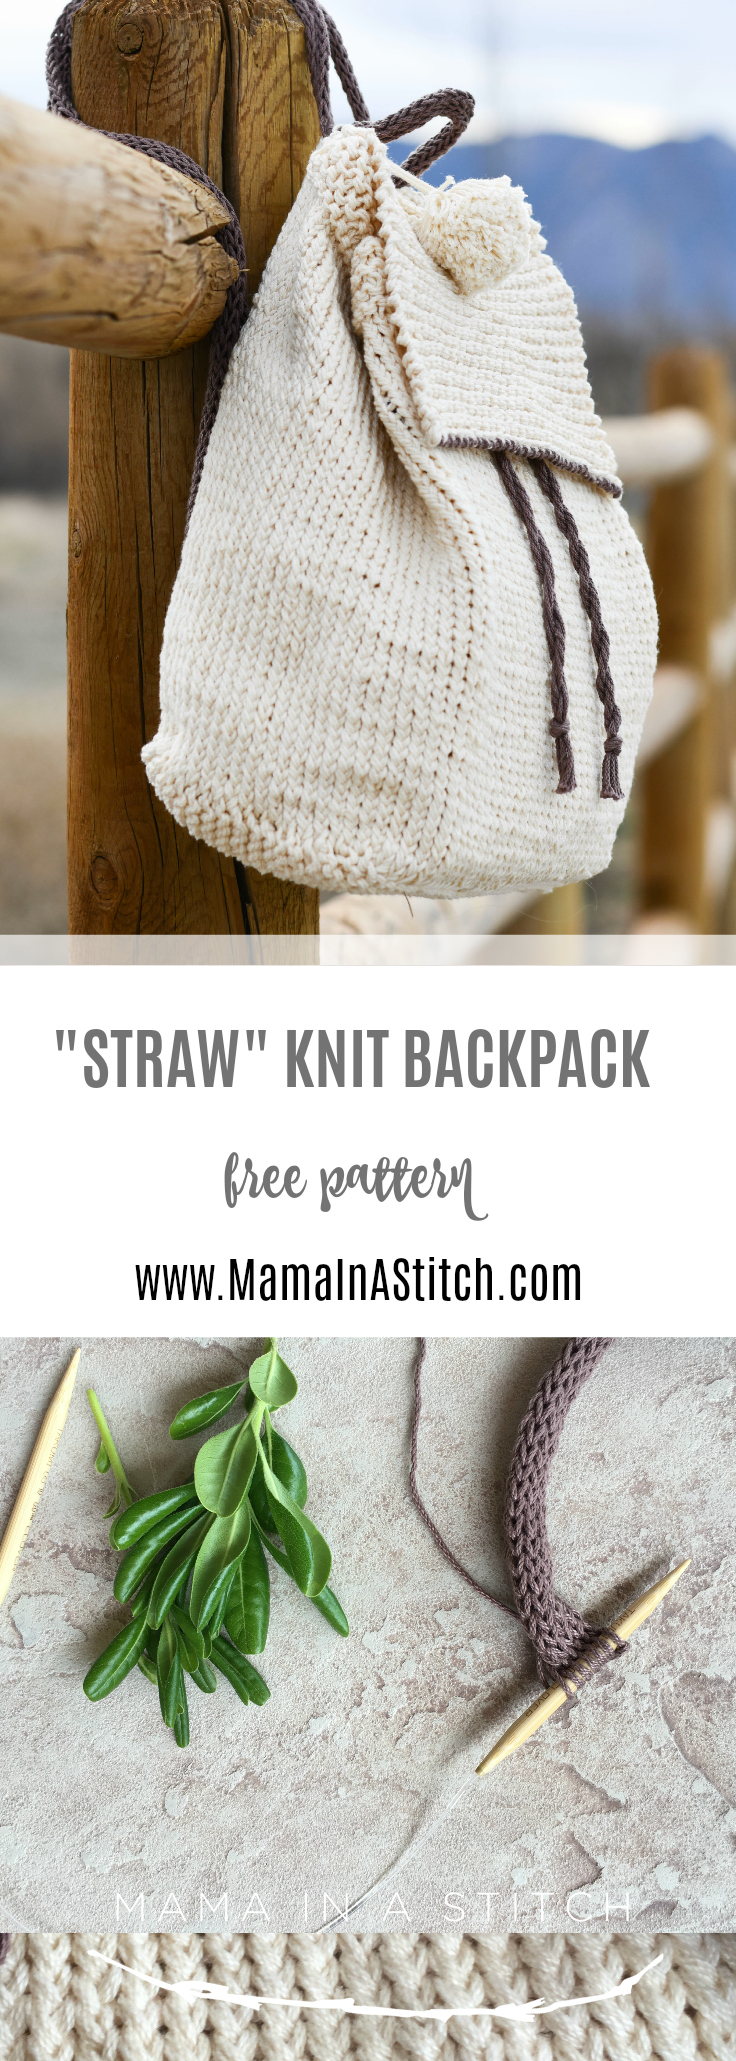 parent Boil Guess How To Knit A Backpack - Easy Knitting Pattern Mama In A Stitch